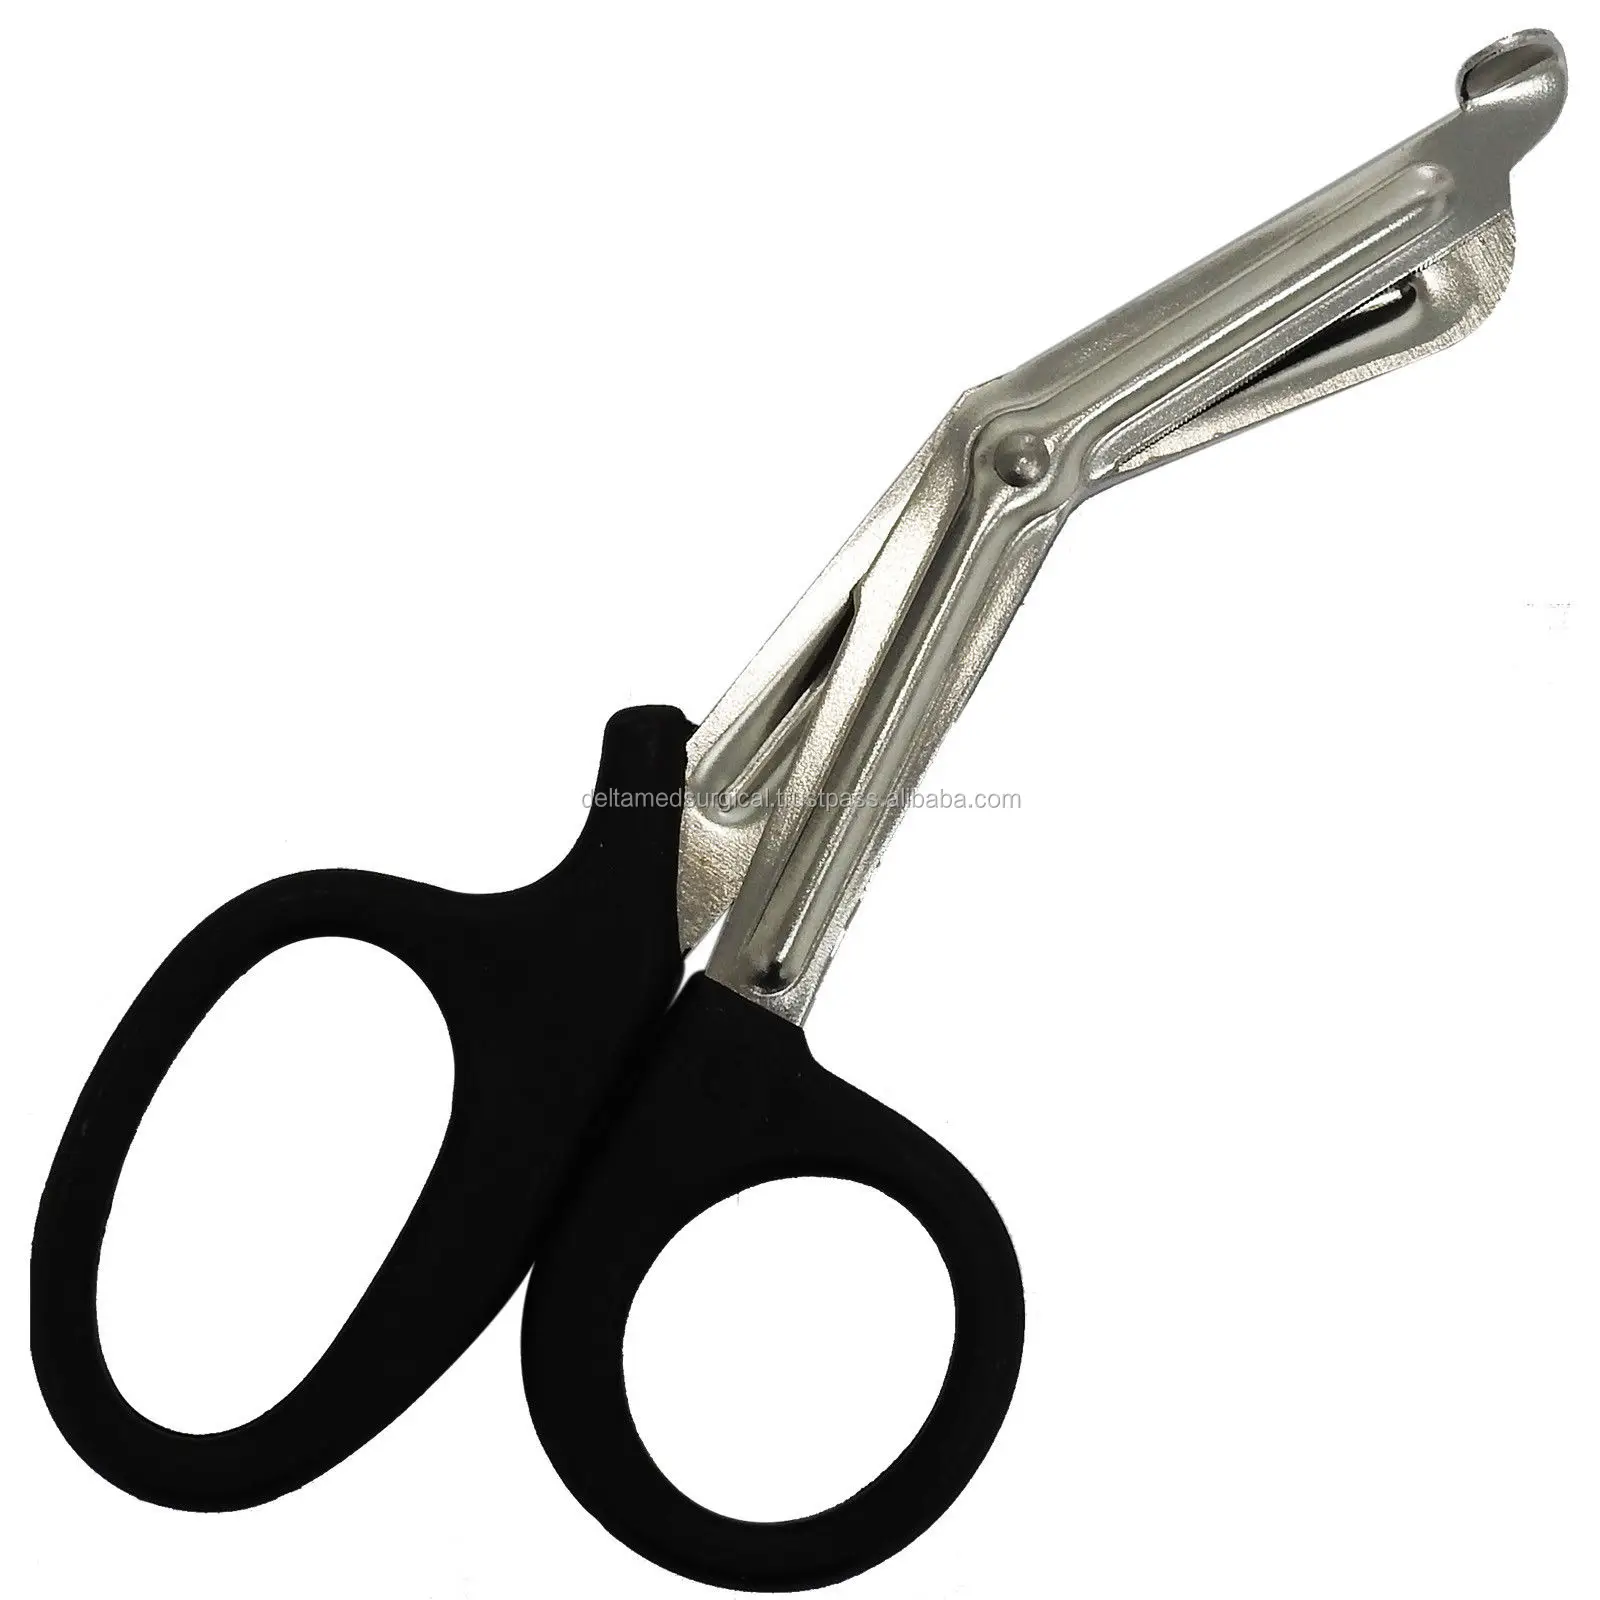 types of scissors and their uses